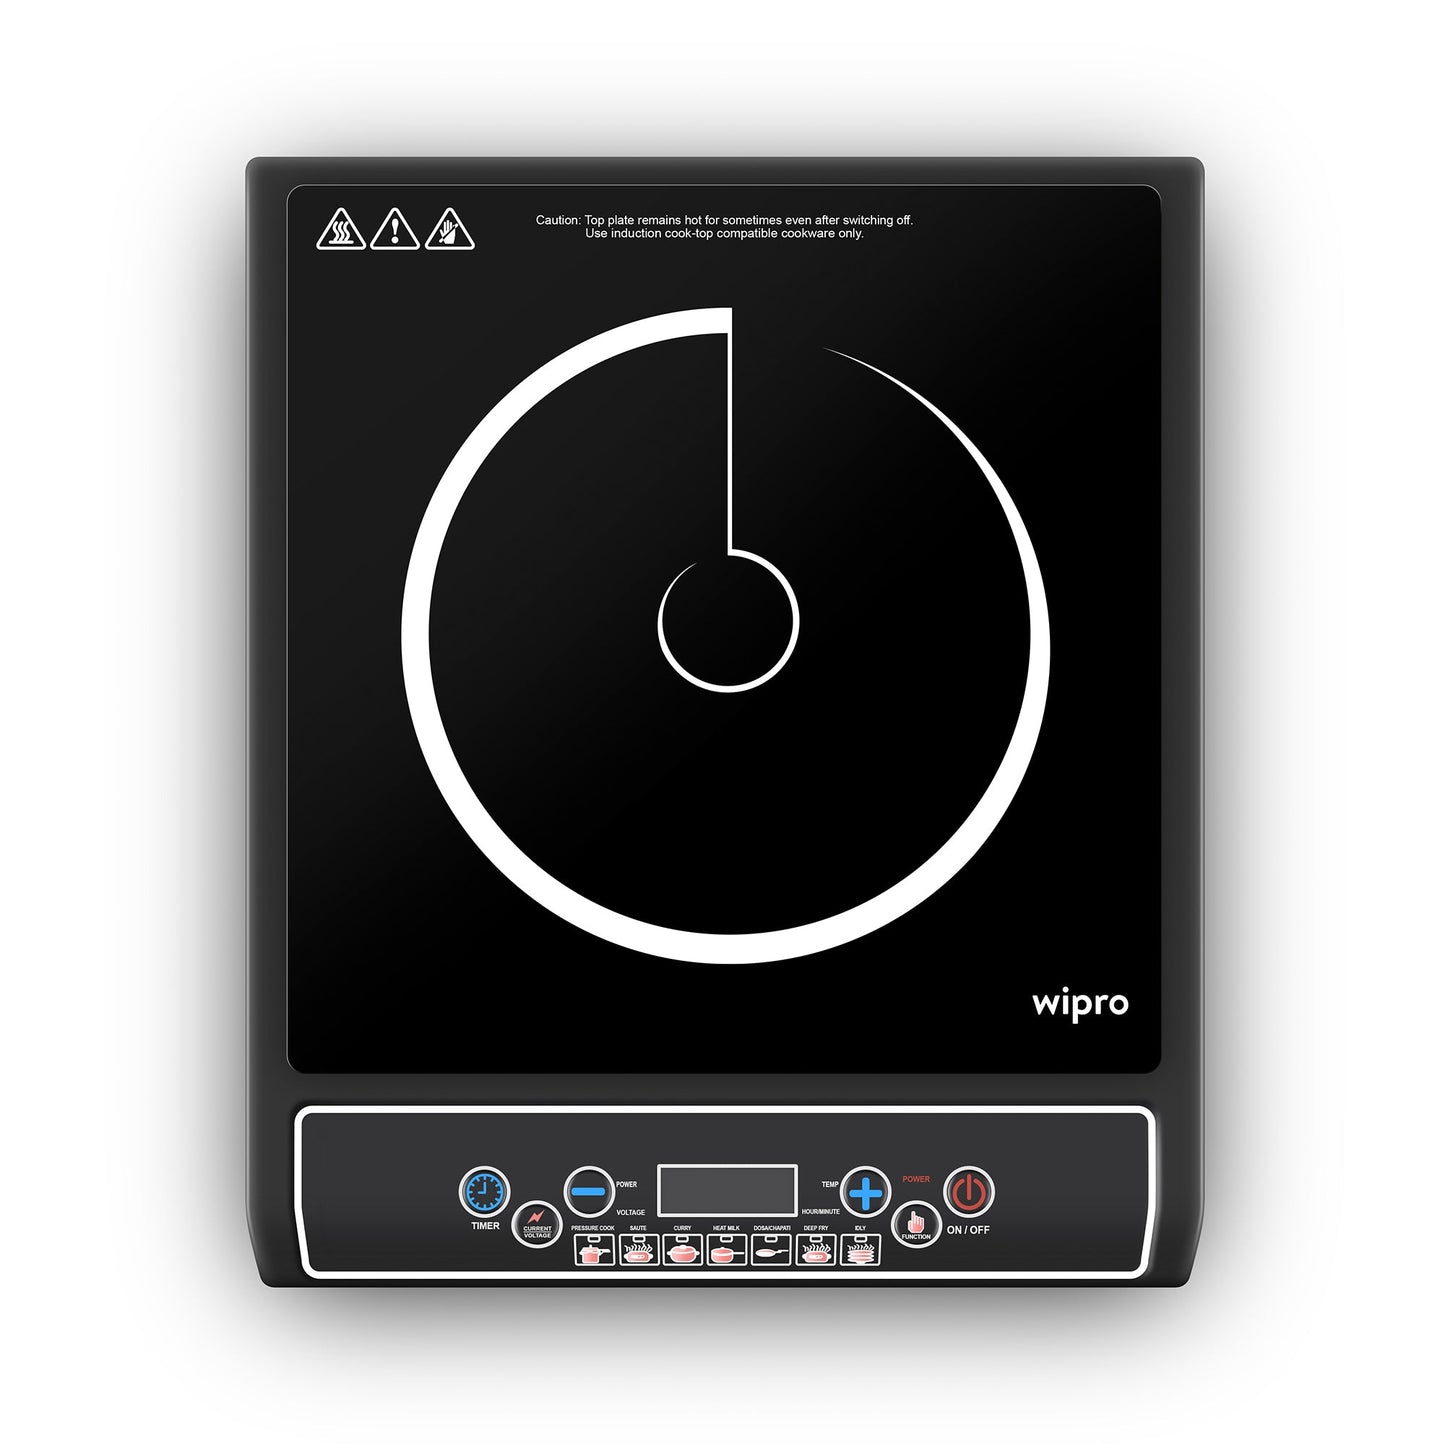 Wipro 1600 Watt Induction Cooktop With Touch Control (Black)